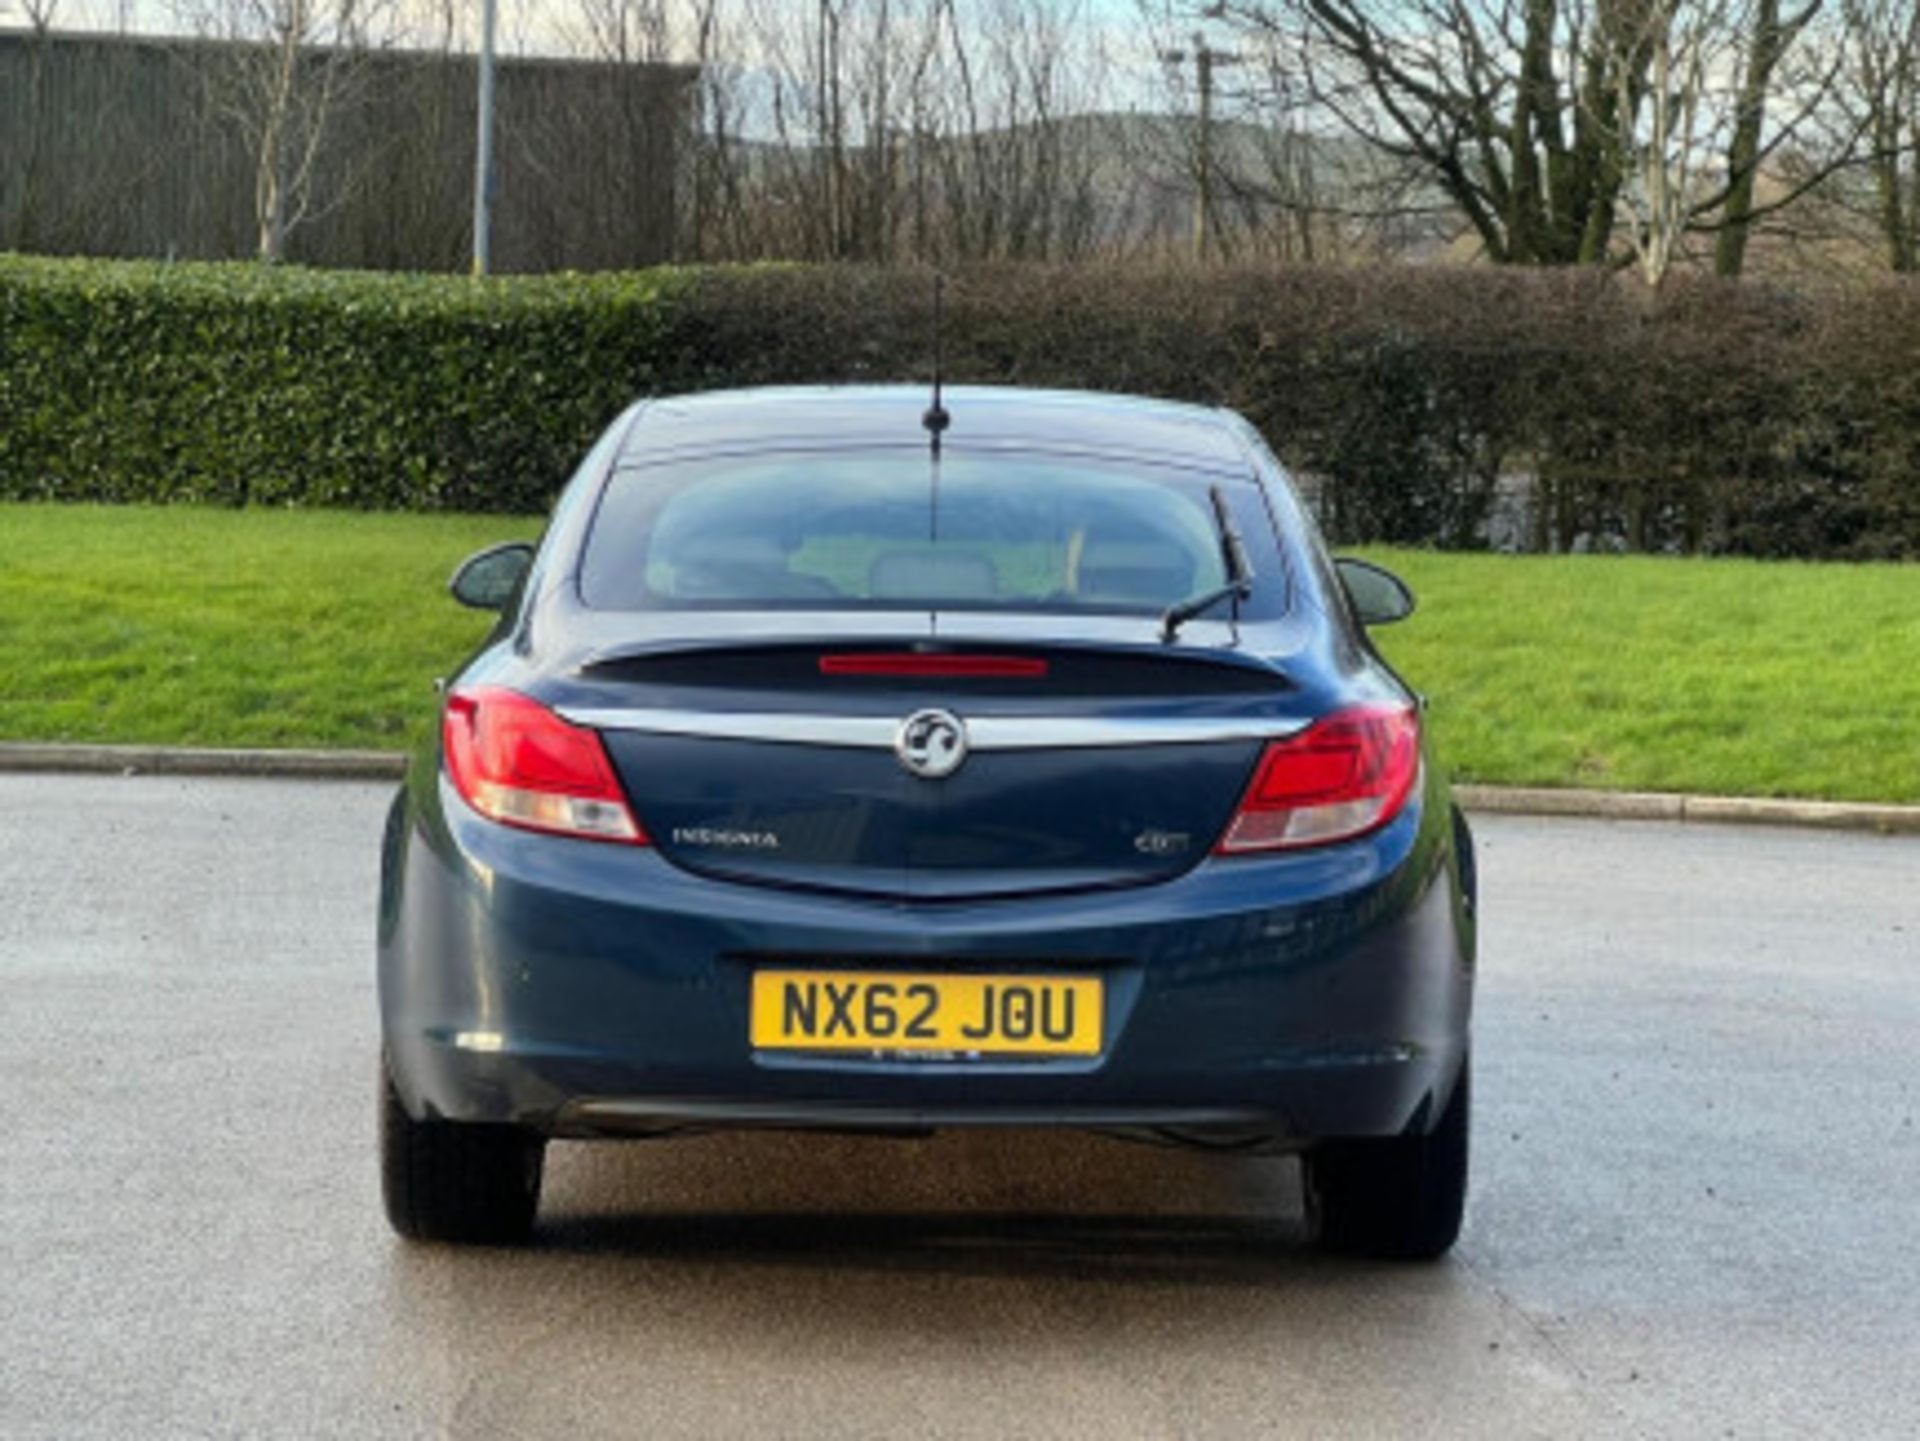 2012 VAUXHALL INSIGNIA 2.0 CDTI ELITE AUTO EURO 5 - DISCOVER EXCELLENCE >>--NO VAT ON HAMMER--<< - Image 34 of 79